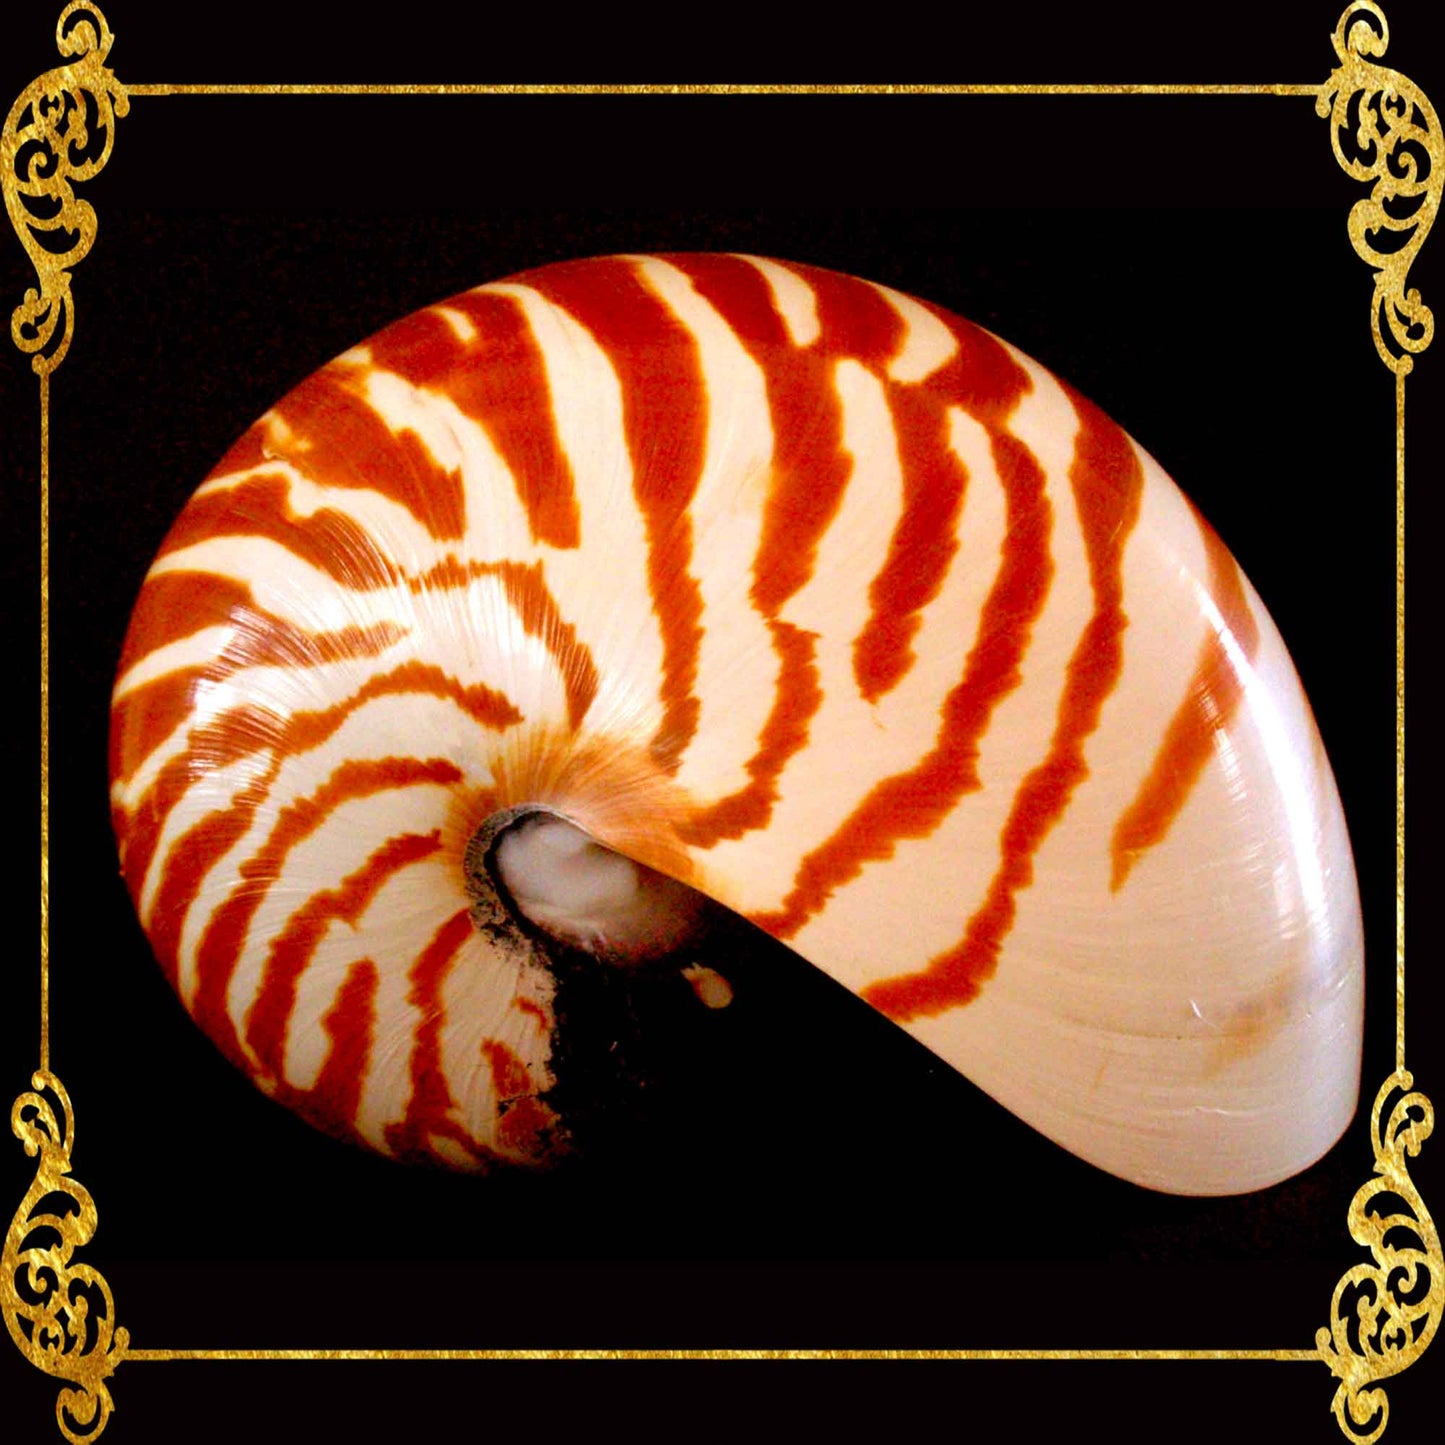 Chamber Nautilus | Natural | 4 - 5 Inches | Large